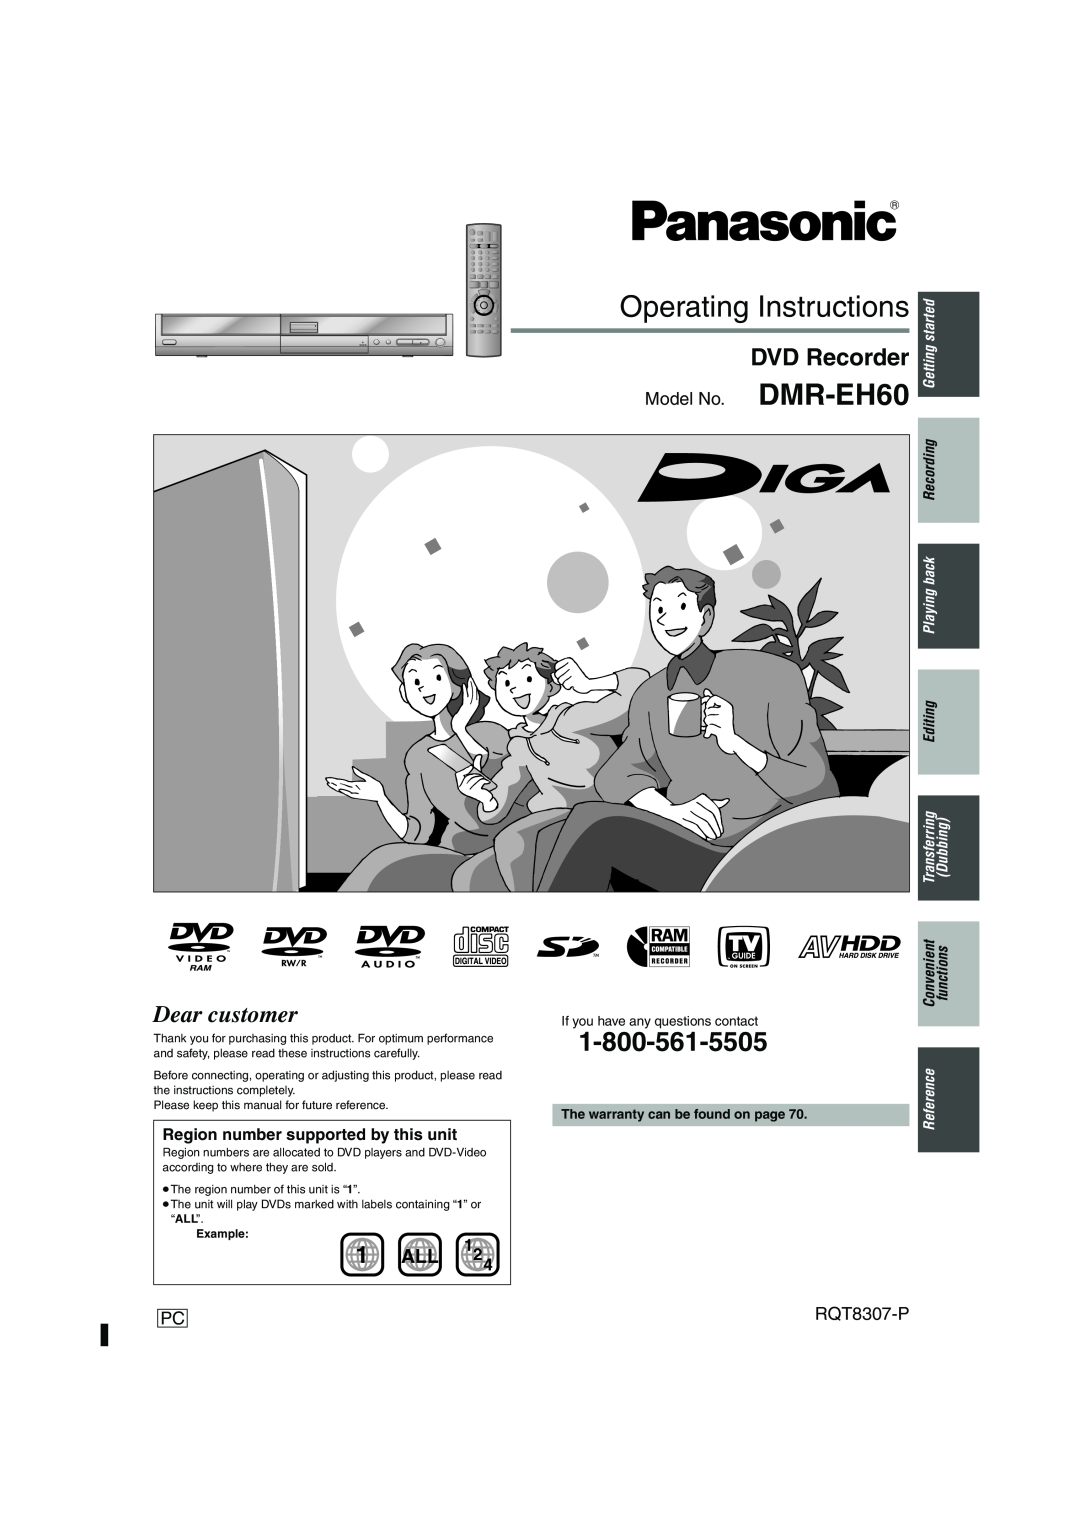 Panasonic warranty DVD Recorder, Model No. DMR-EH60, RQT8307-P, Region number supported by this unit, Getting started 